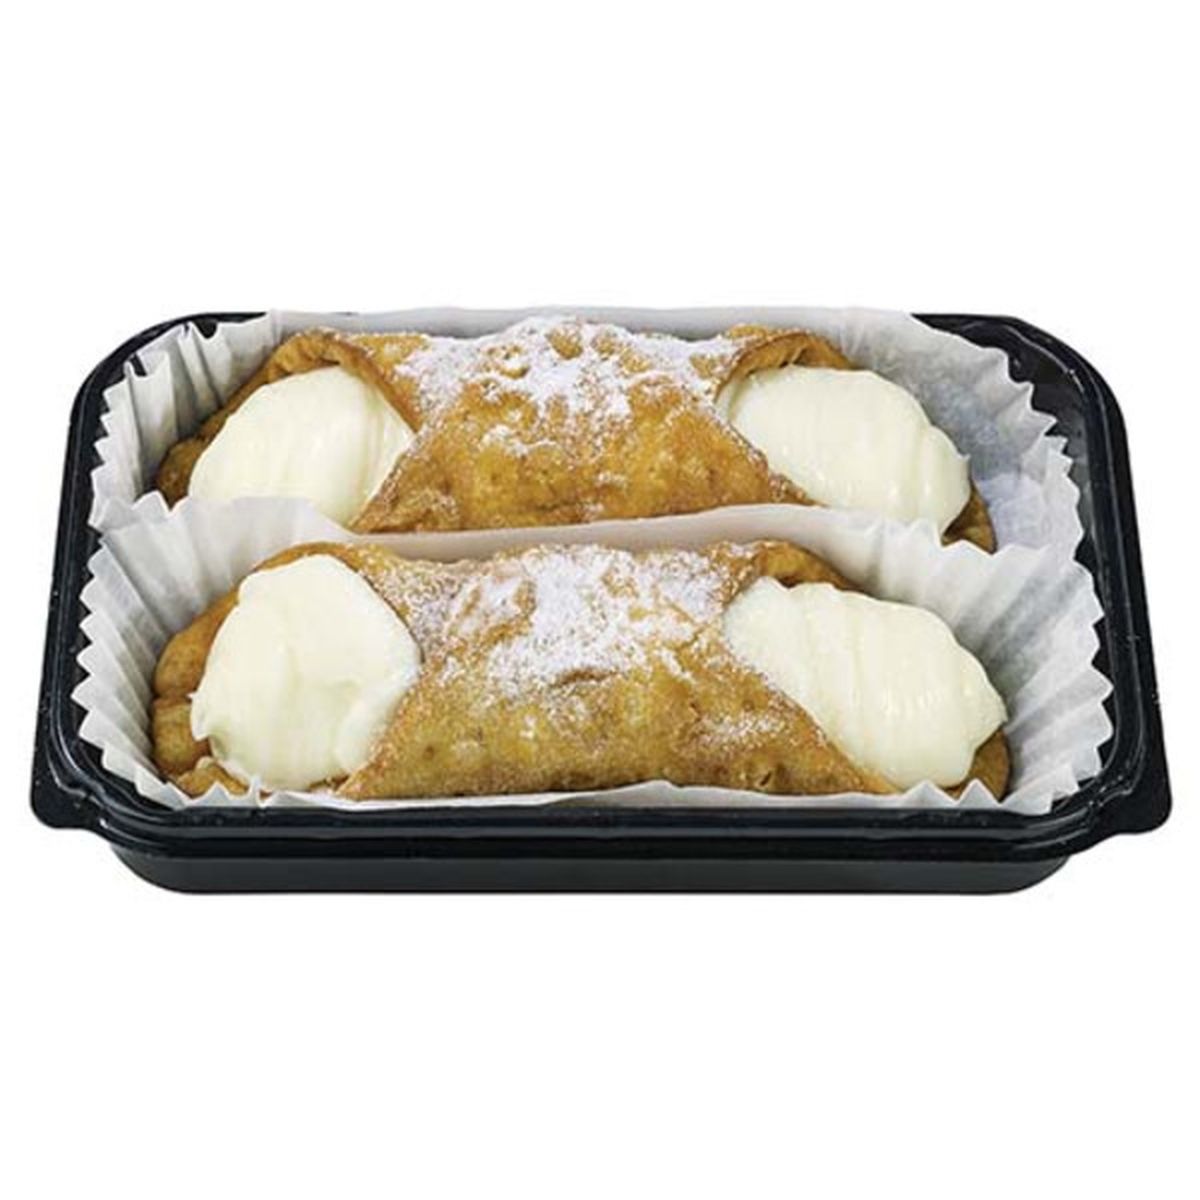 Calories in Wegmans Large Cheese Filled Cannolis, 2pk